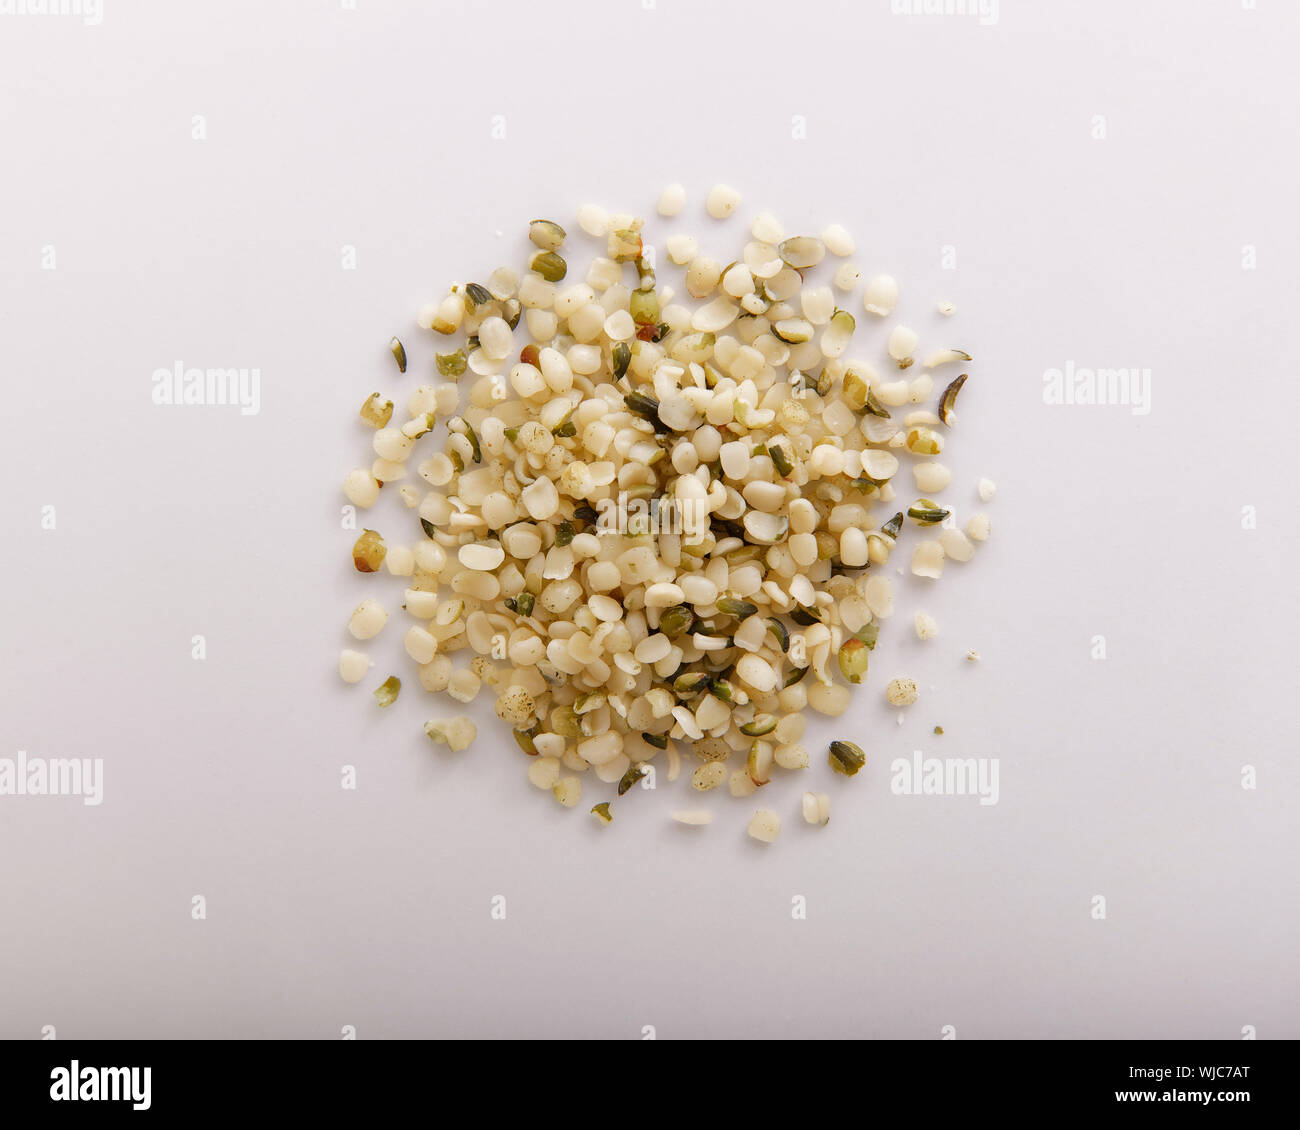 Hemp seeds piled and seen from above, closeup Stock Photo